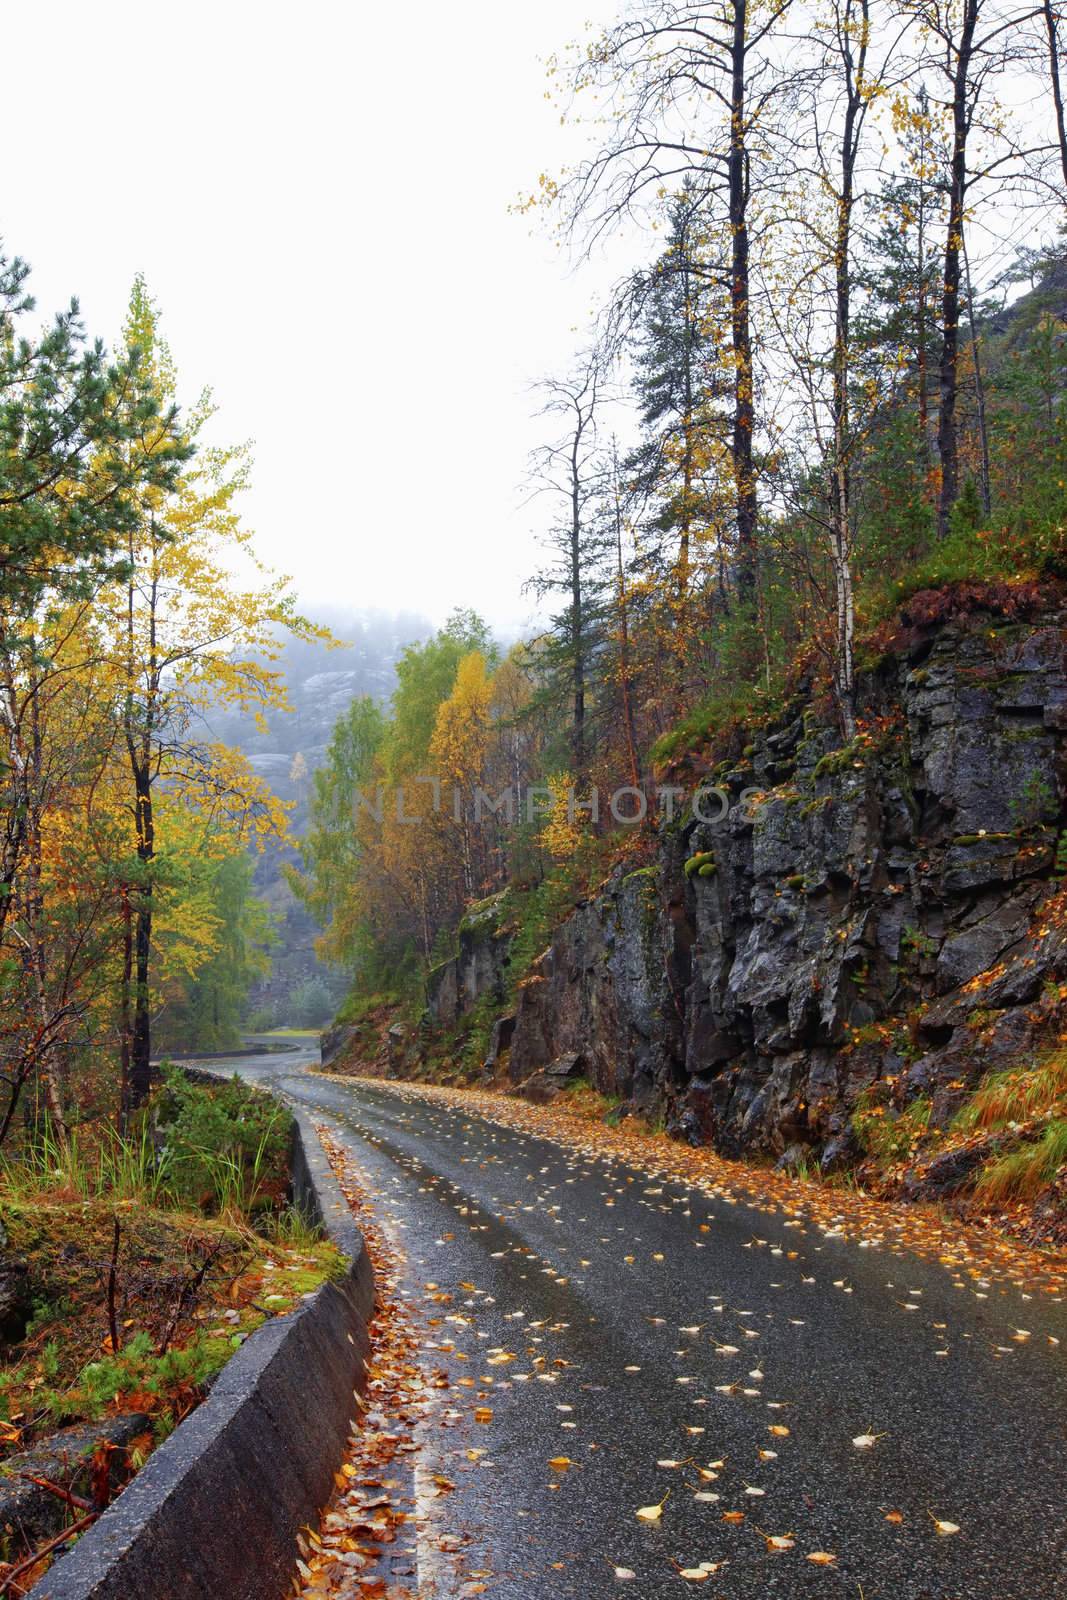 A winding road in autumn colors on a foggy day